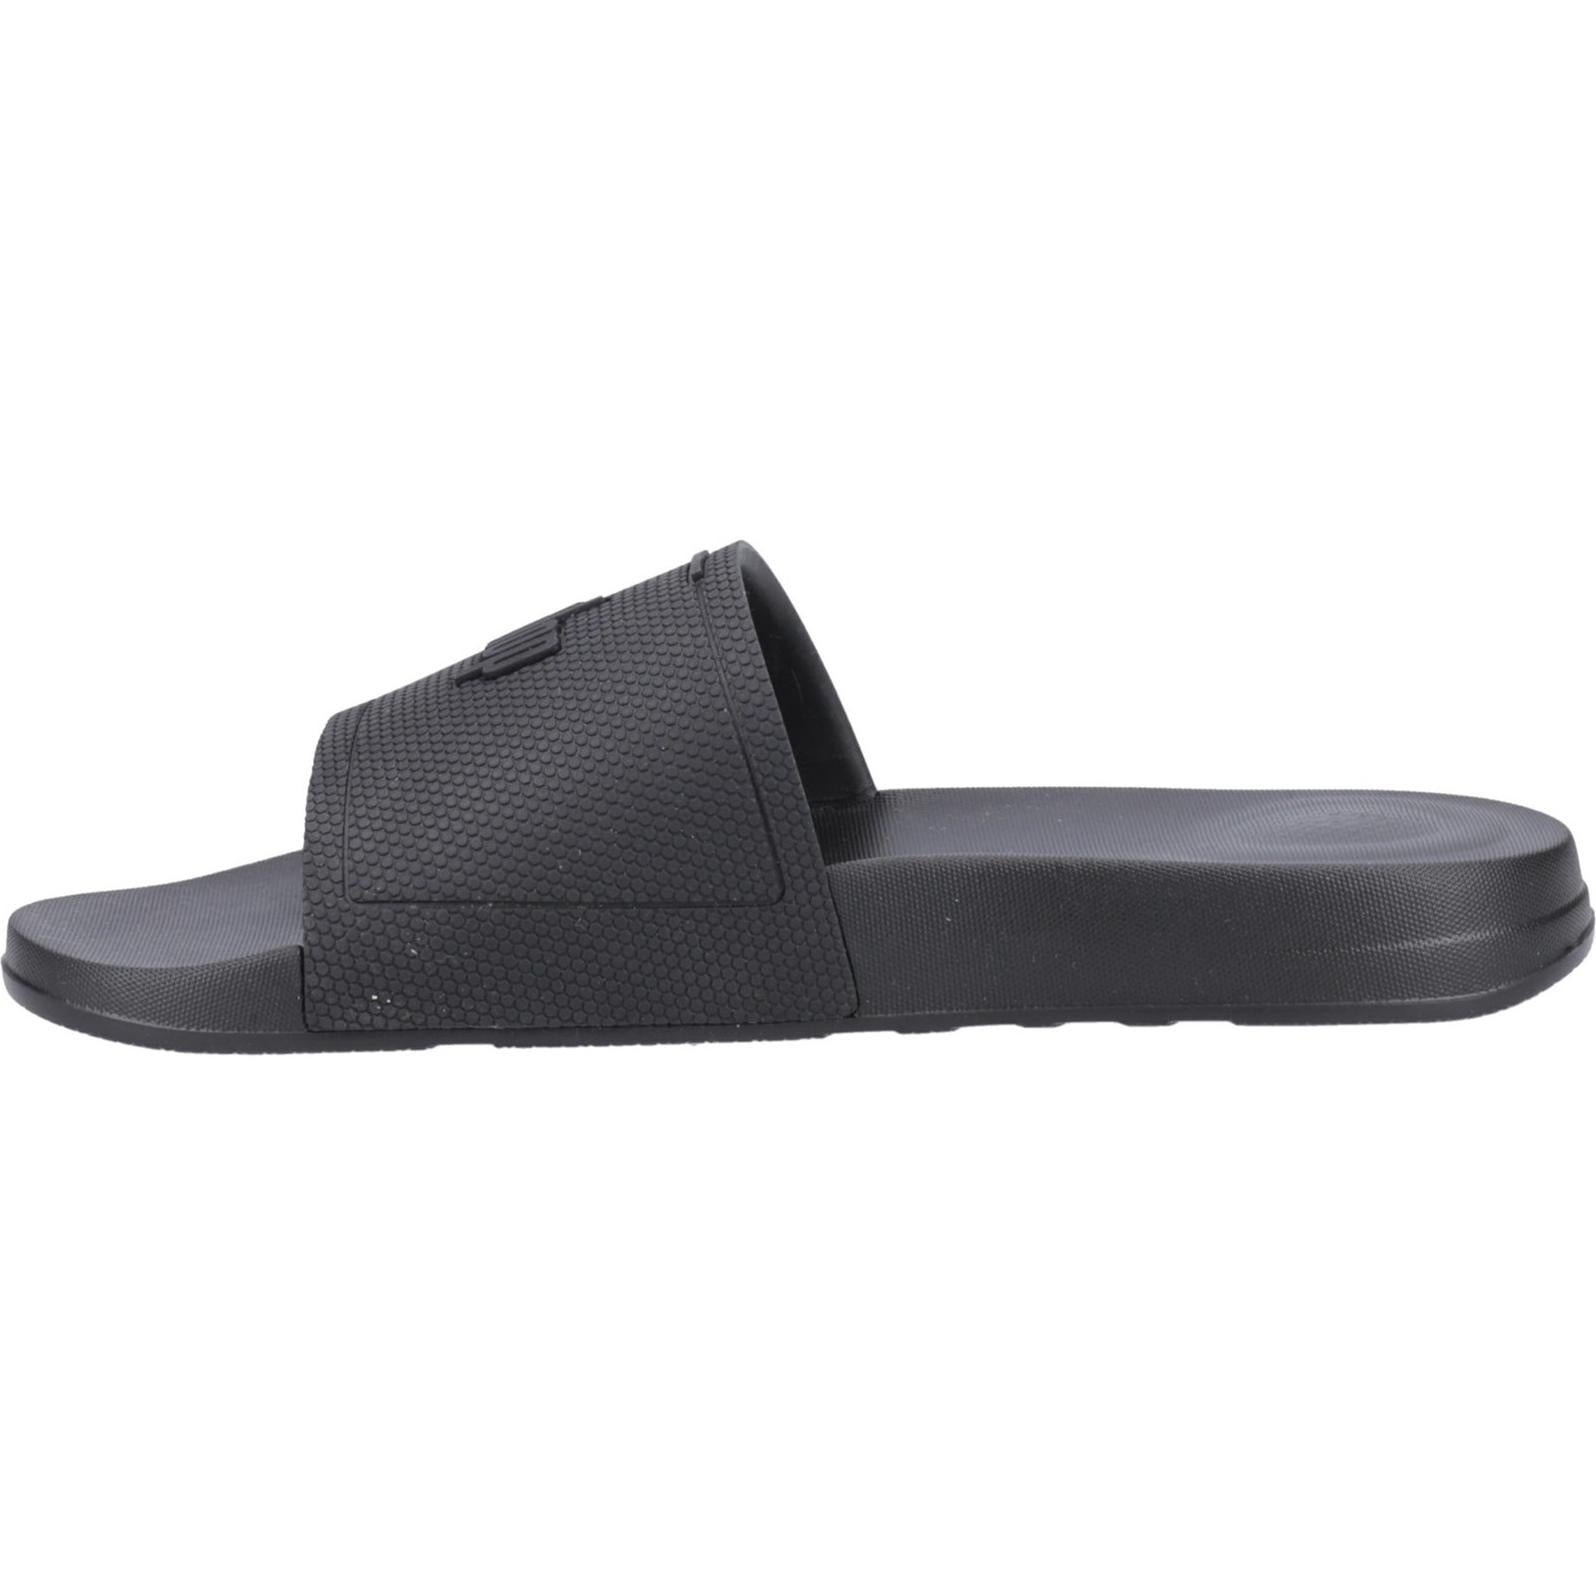 Fitflop iQUSHION Sliders Sandals